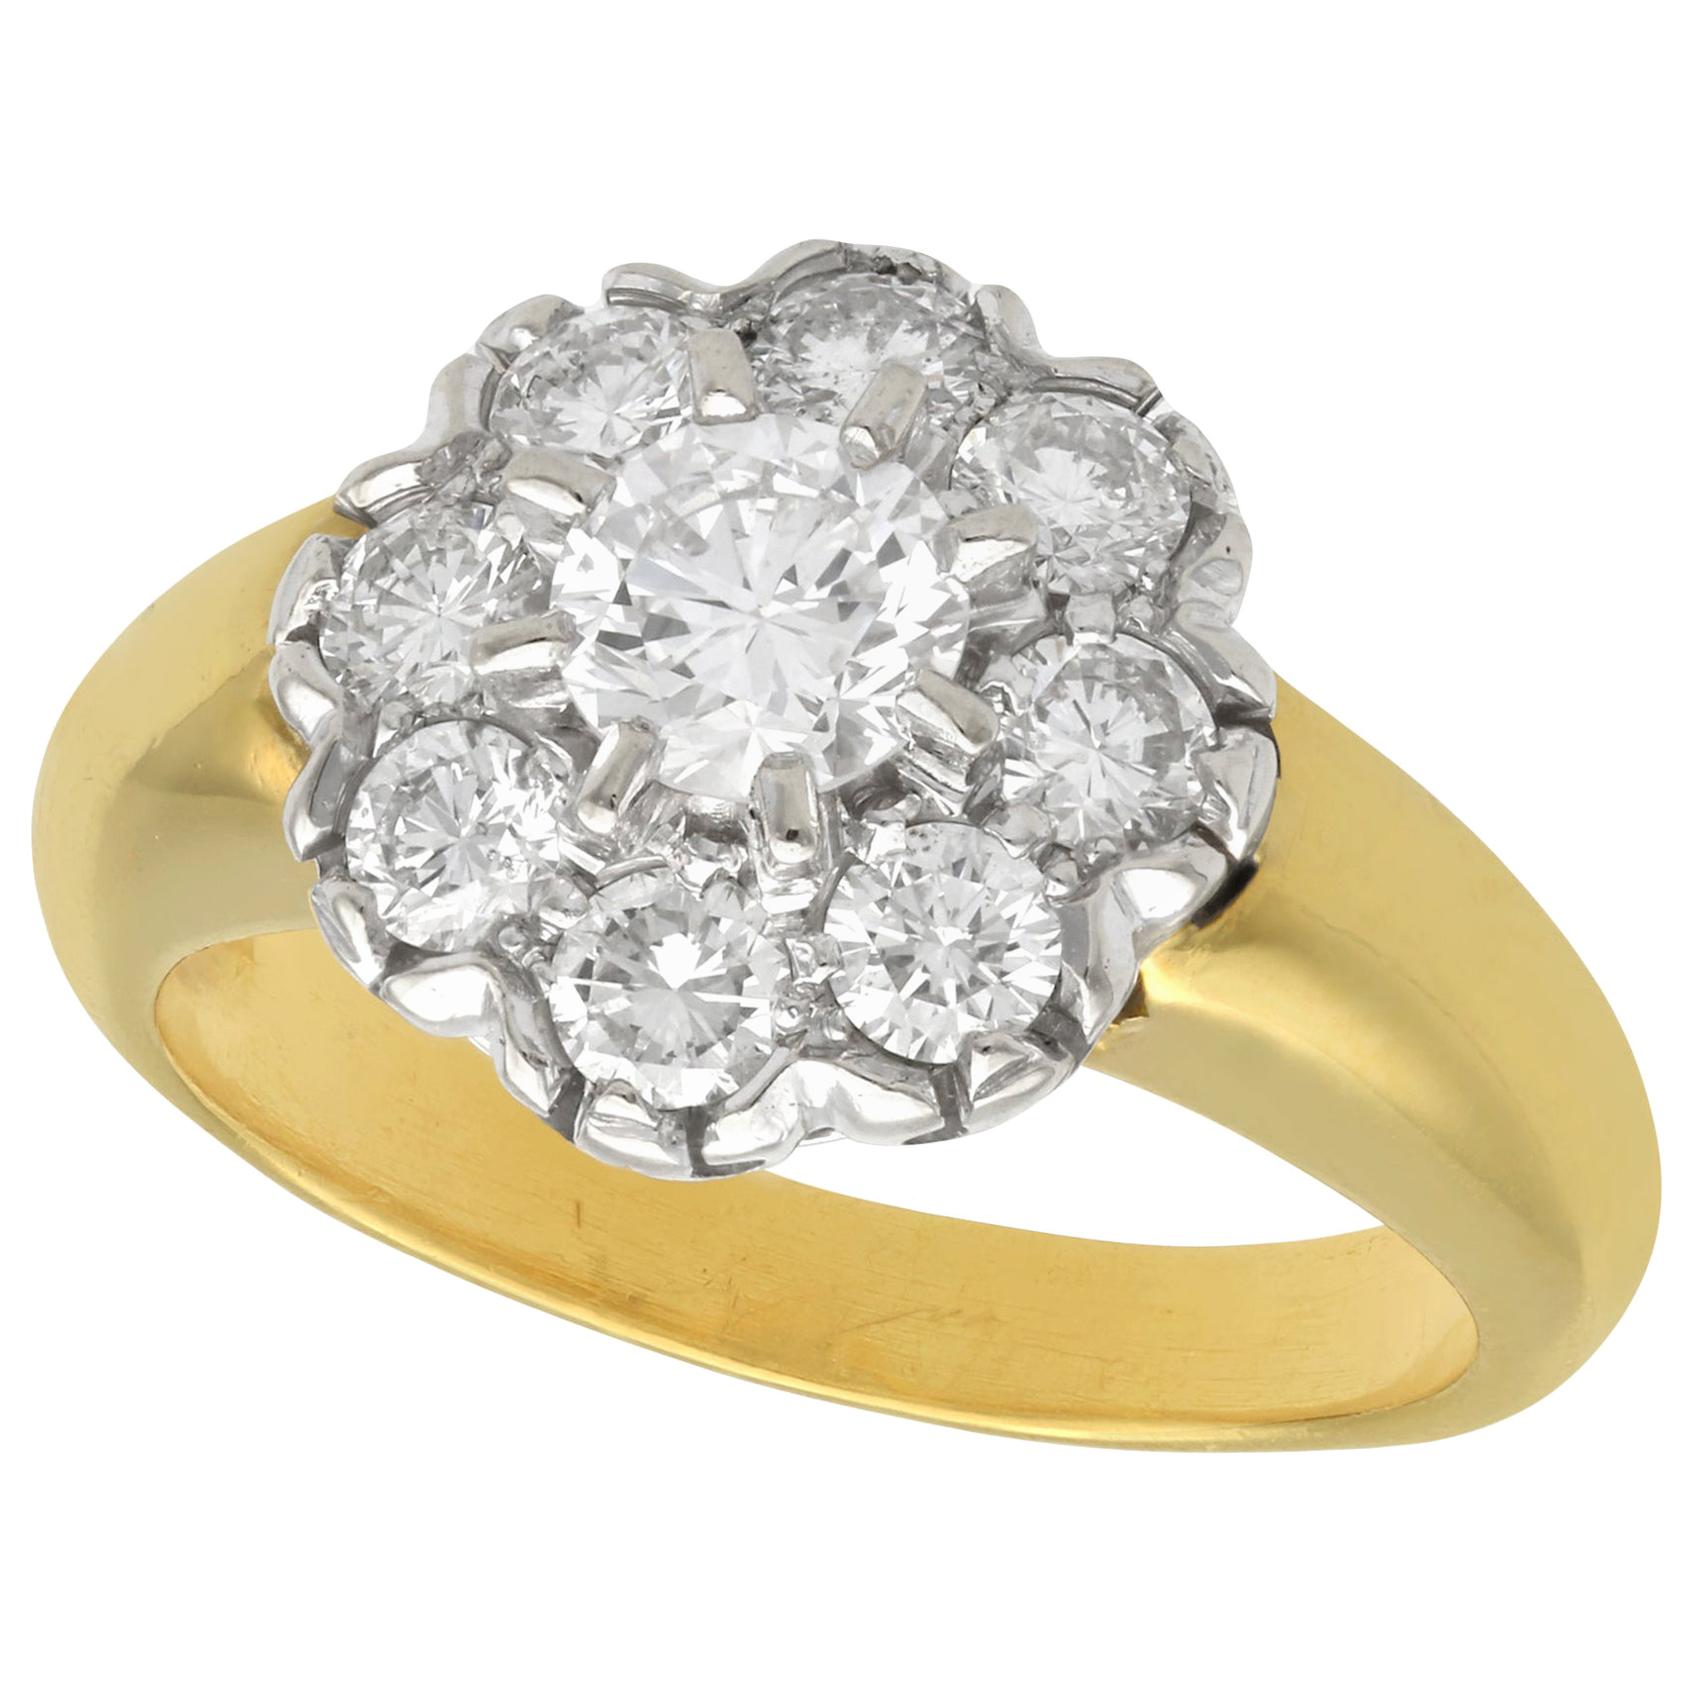 Vintage French 1.15 Carat Diamond and Yellow Gold Cluster Ring